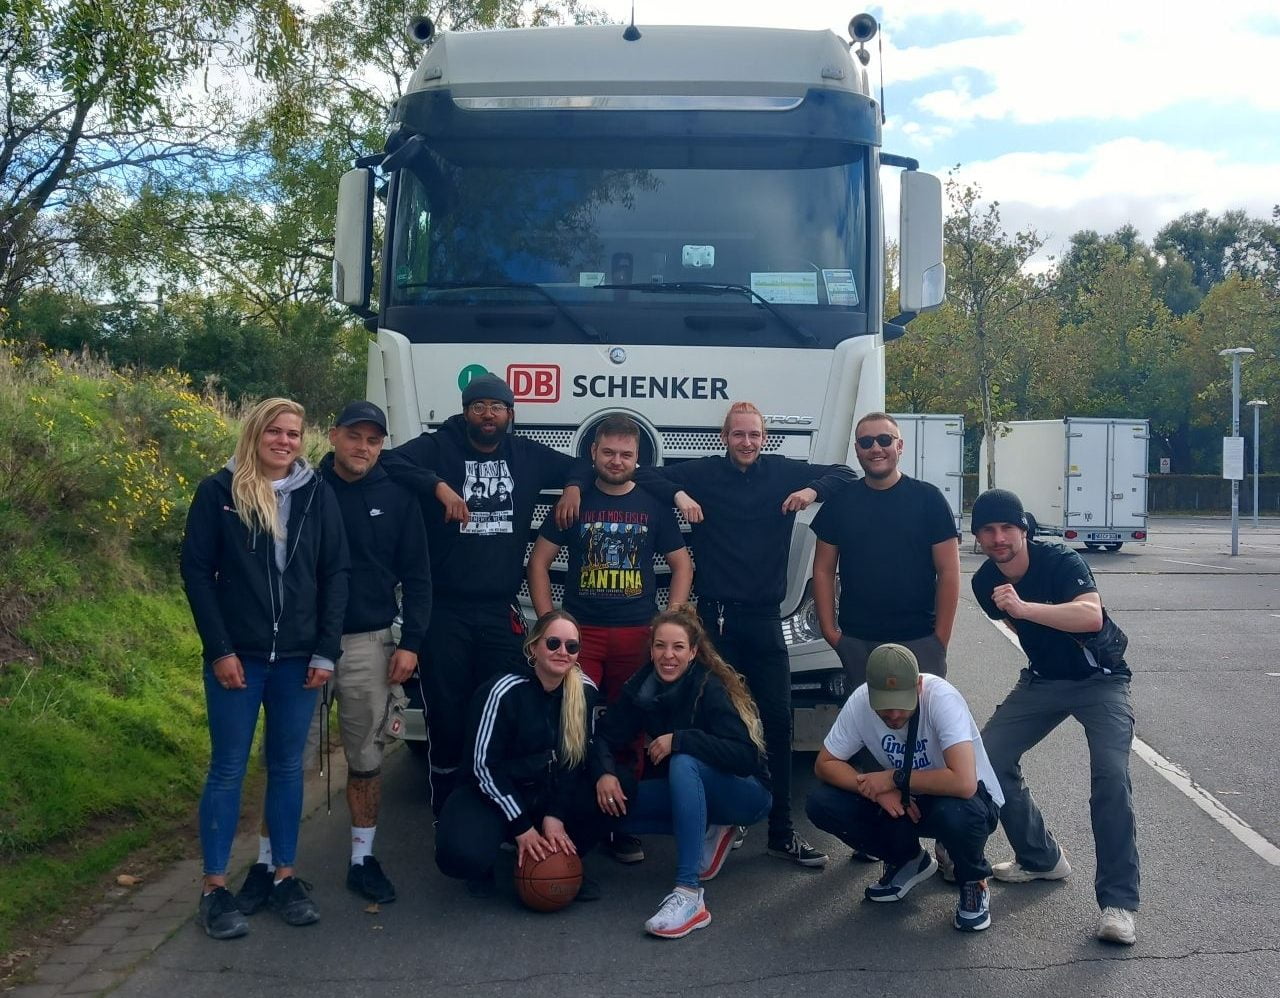 Sonnen Expo Logistics Team together with the team of DB Schenker in front of a lorry of DB Schenker.